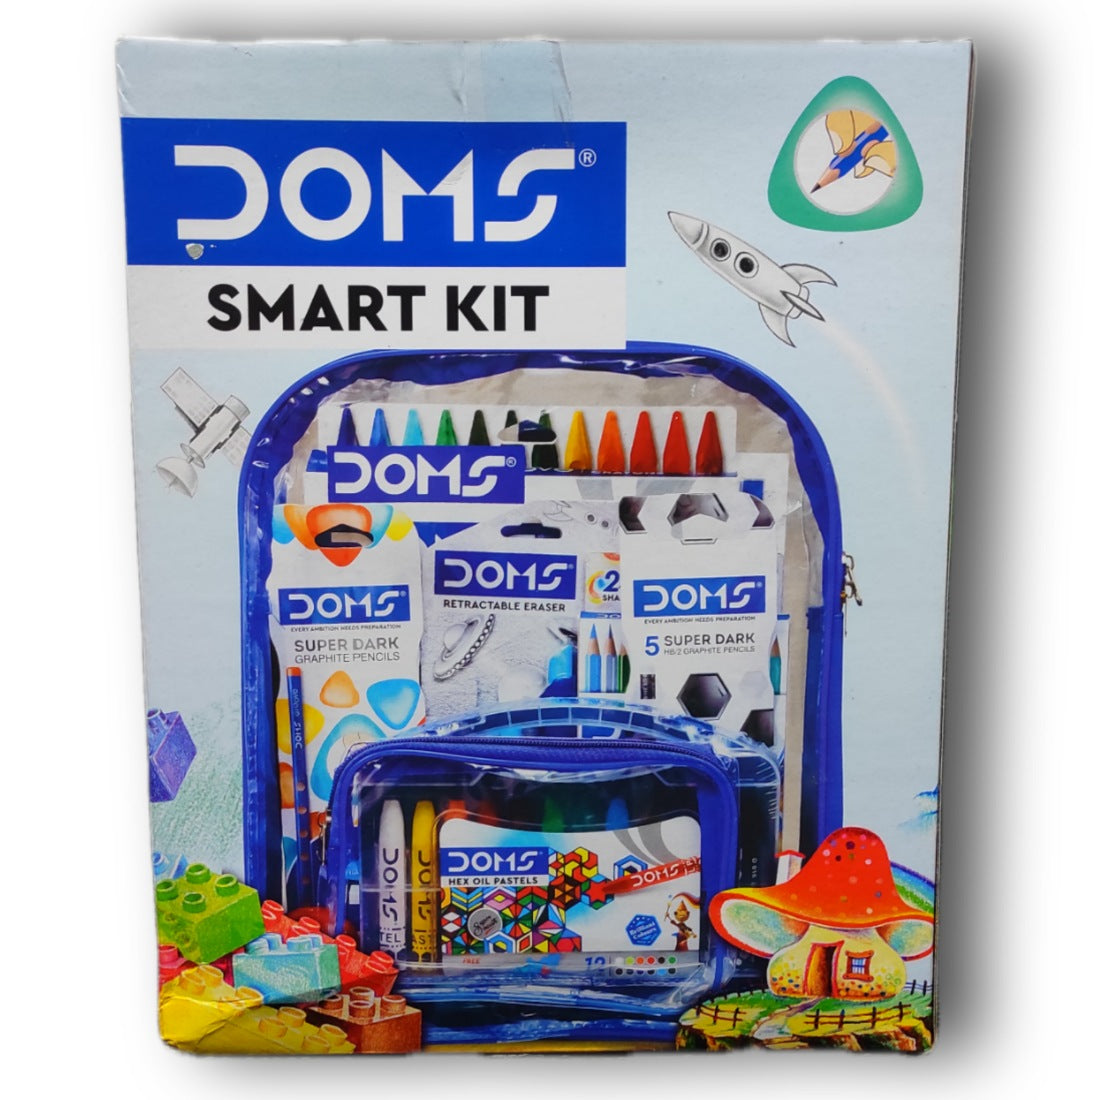 DOMS SMART KIT WITH 12 EXITED UNIQUE STATIONERY